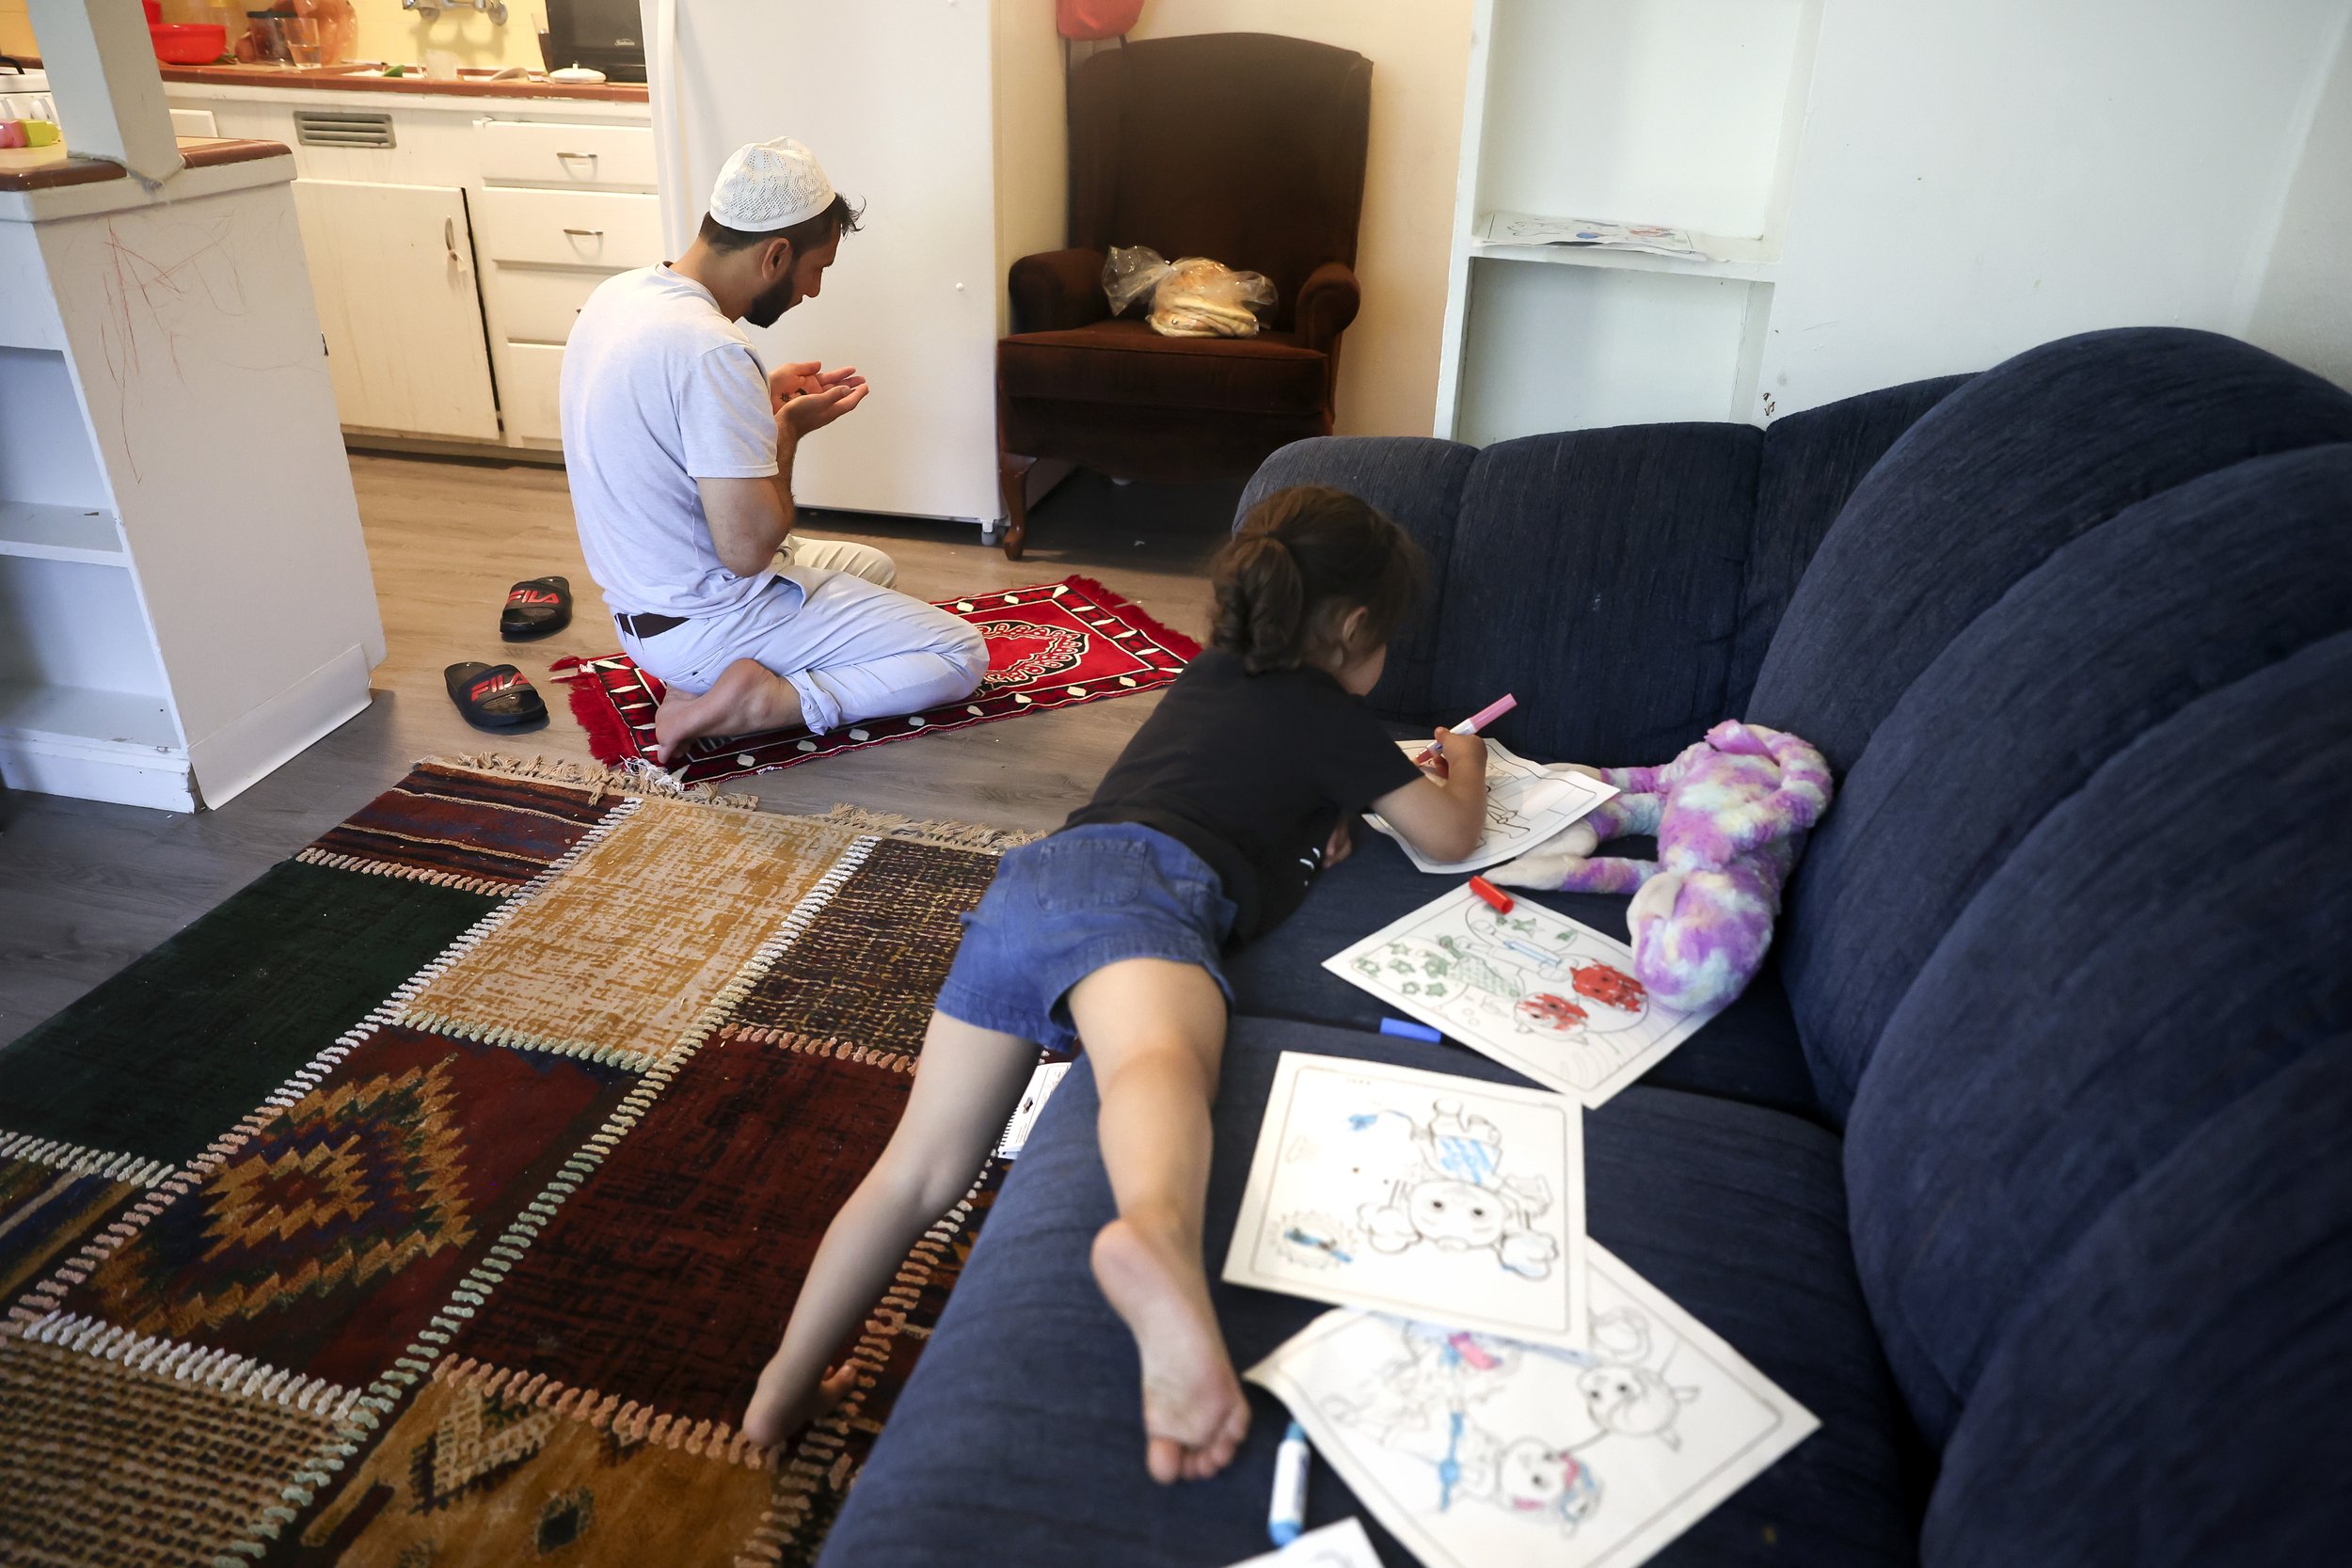  Zahra Mohammadi lays on the couch and colors while her father Najibullah Mohammadi prays in the kitchen  on Tuesday, May 3, 2022. Najibullah Mohammadi, his wife Susan, their two young children Zahra and Yasar, and their soon-to-be born third child Y